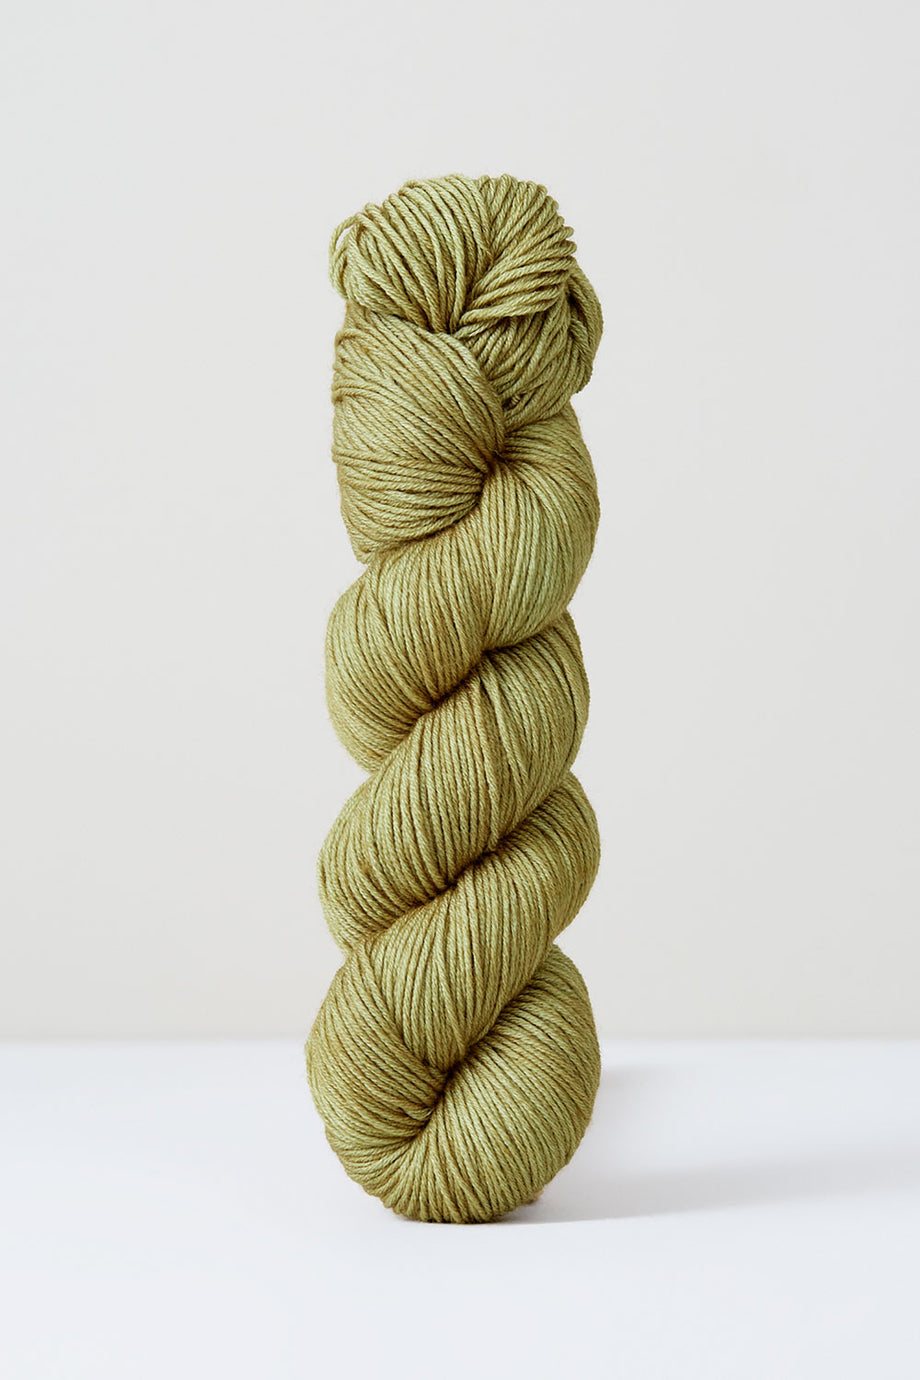 Buttons & Bravery | Hand Dyed DK Weight Yarn